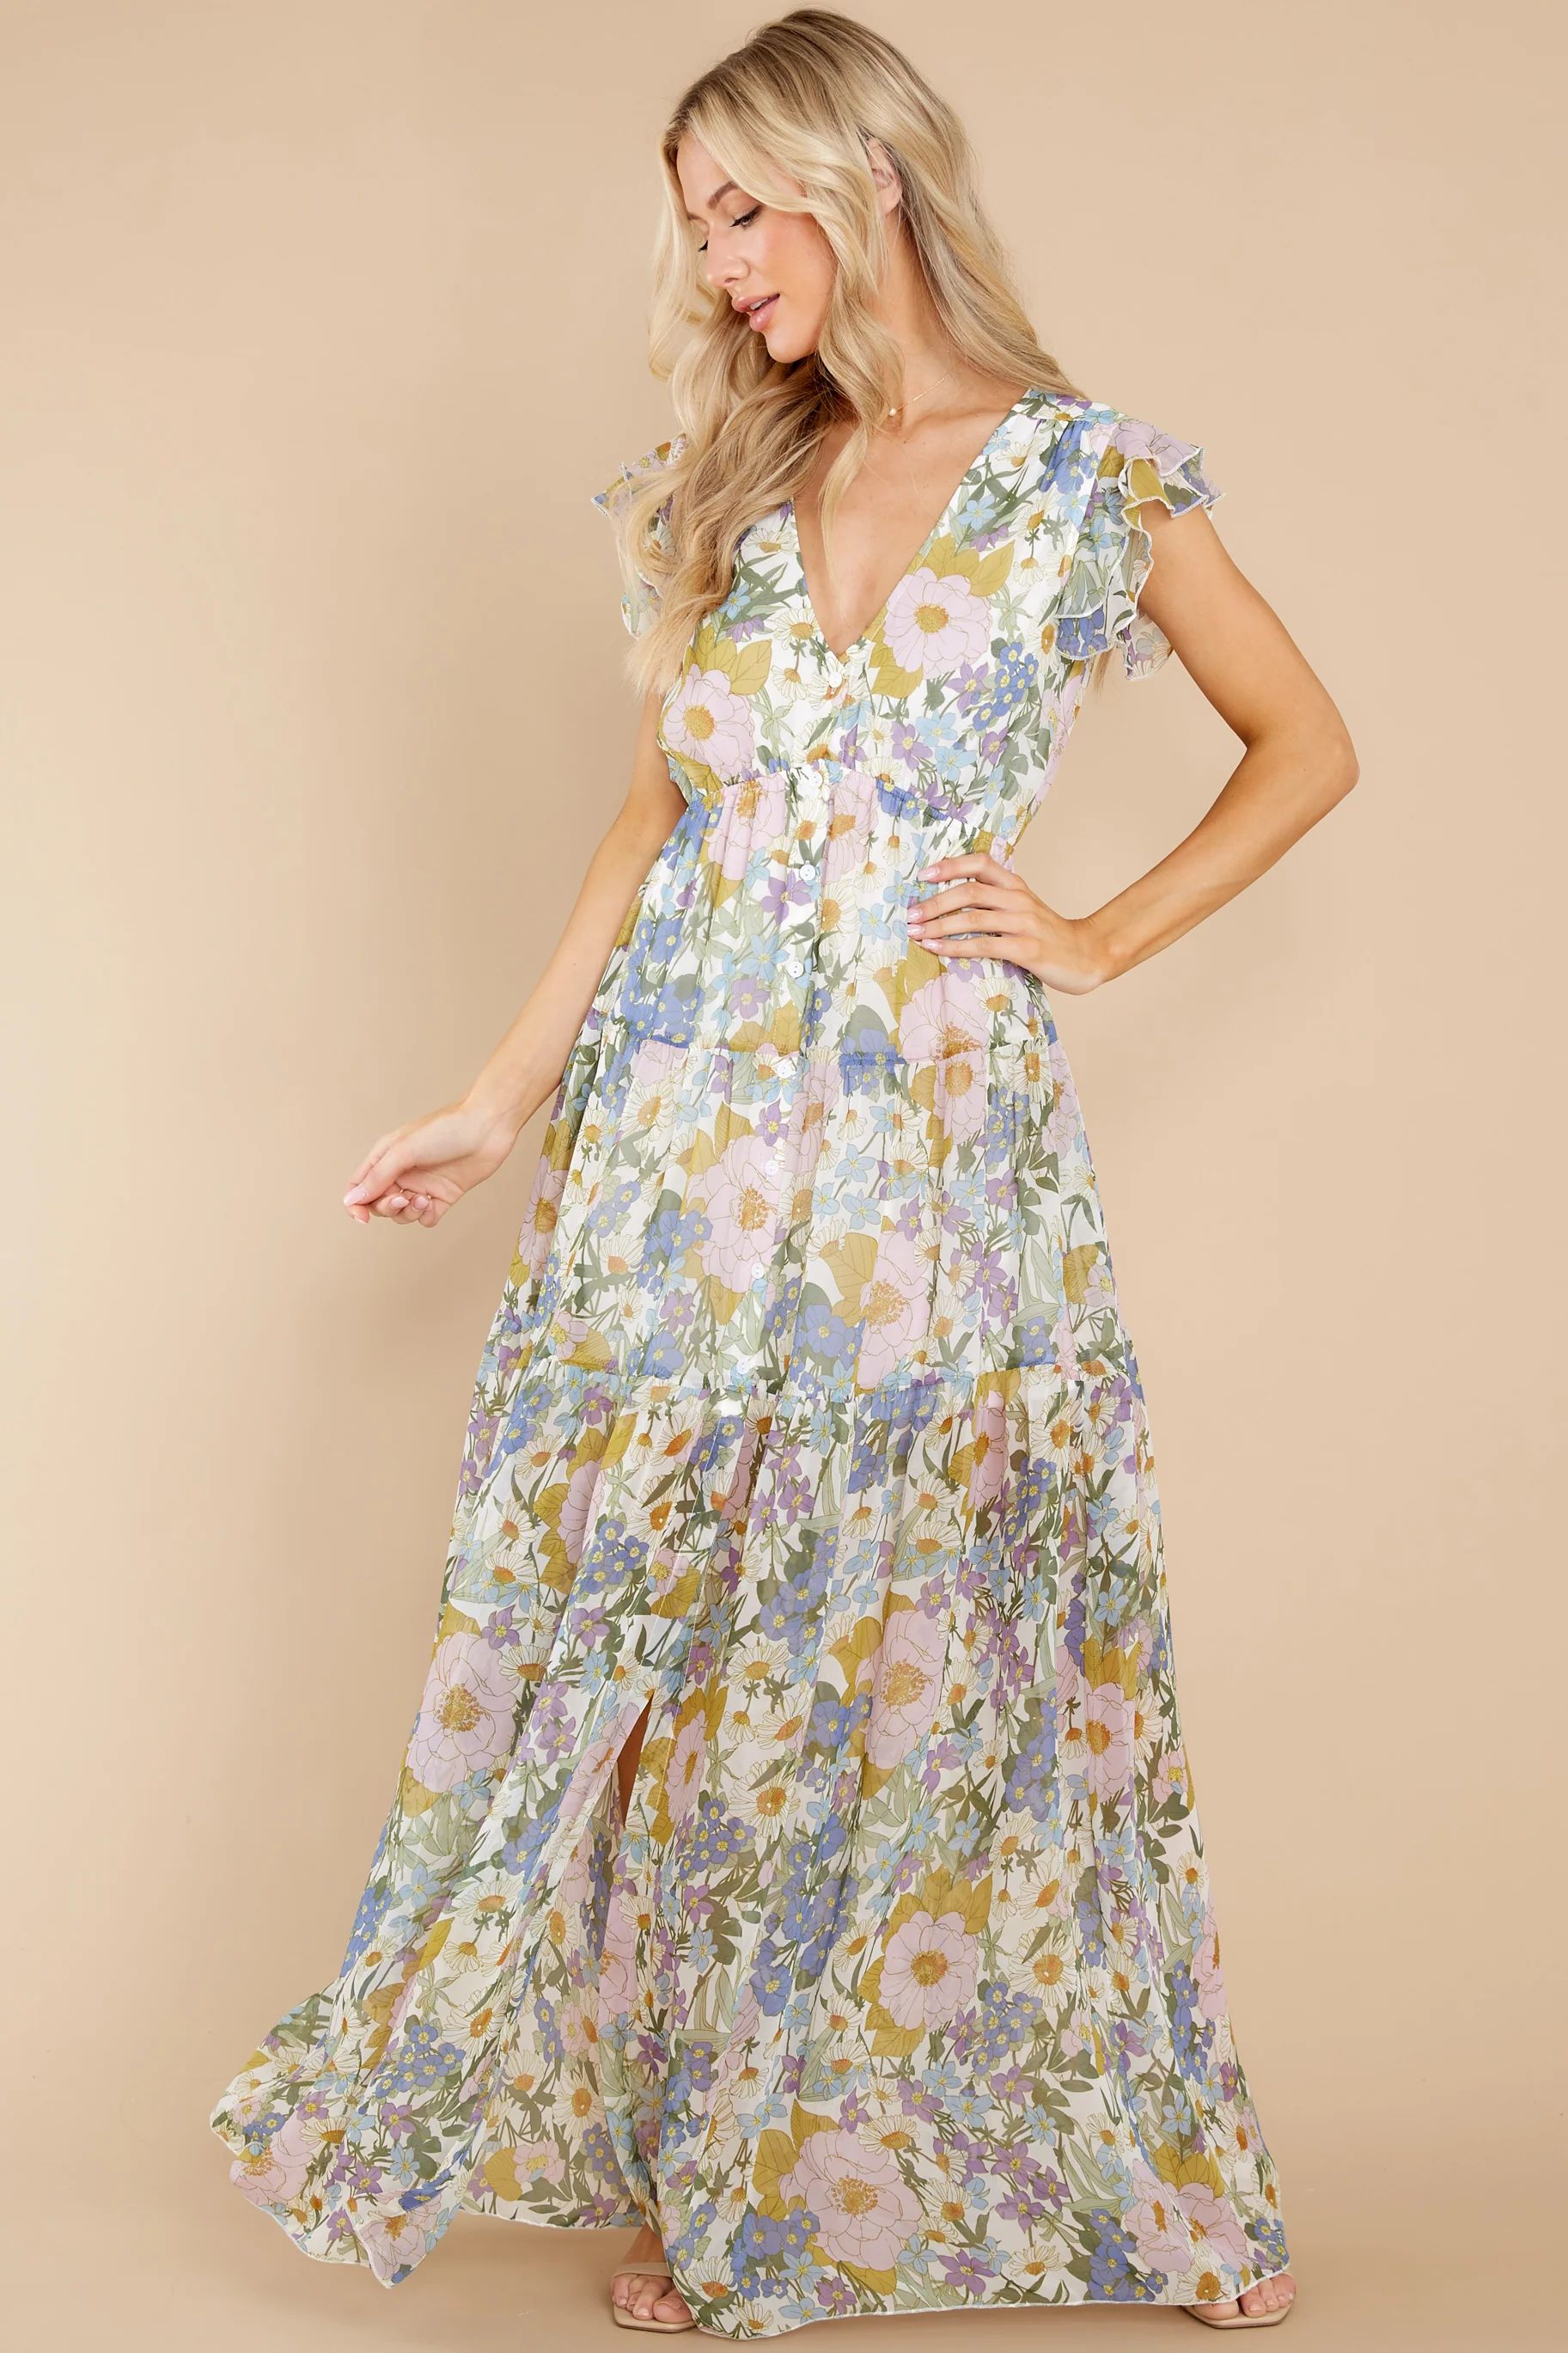 You're My Love White And Blue Floral Print Maxi Dress | Red Dress 